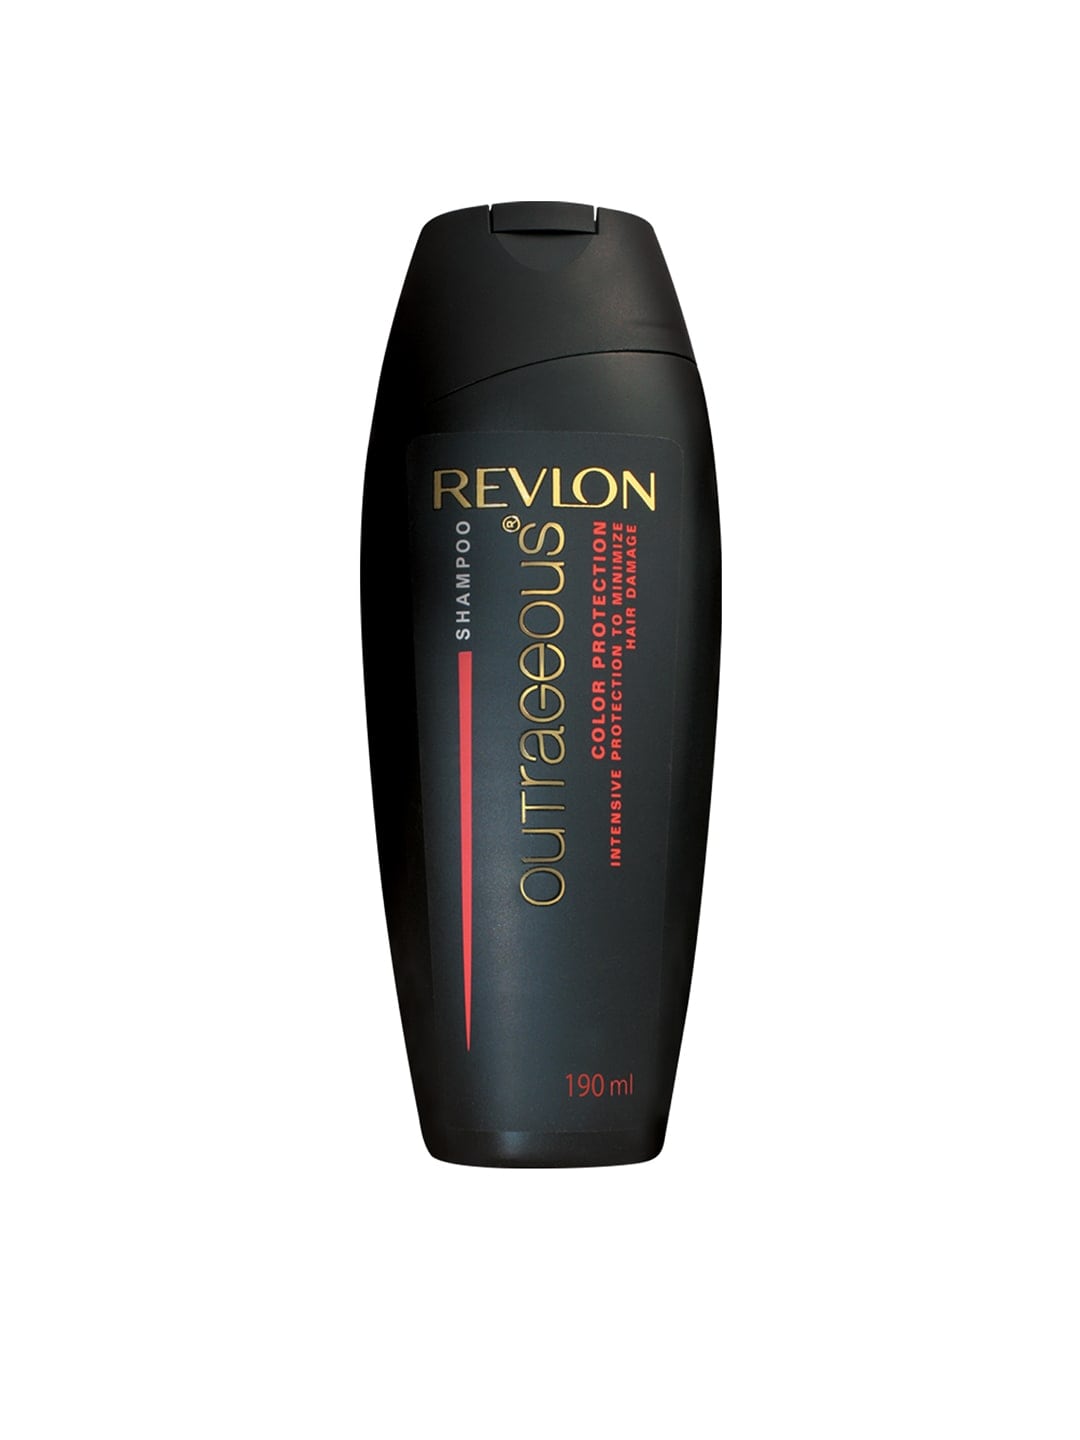 Revlon Outrageous Color Protection Shampoo - 190 ml Price in India